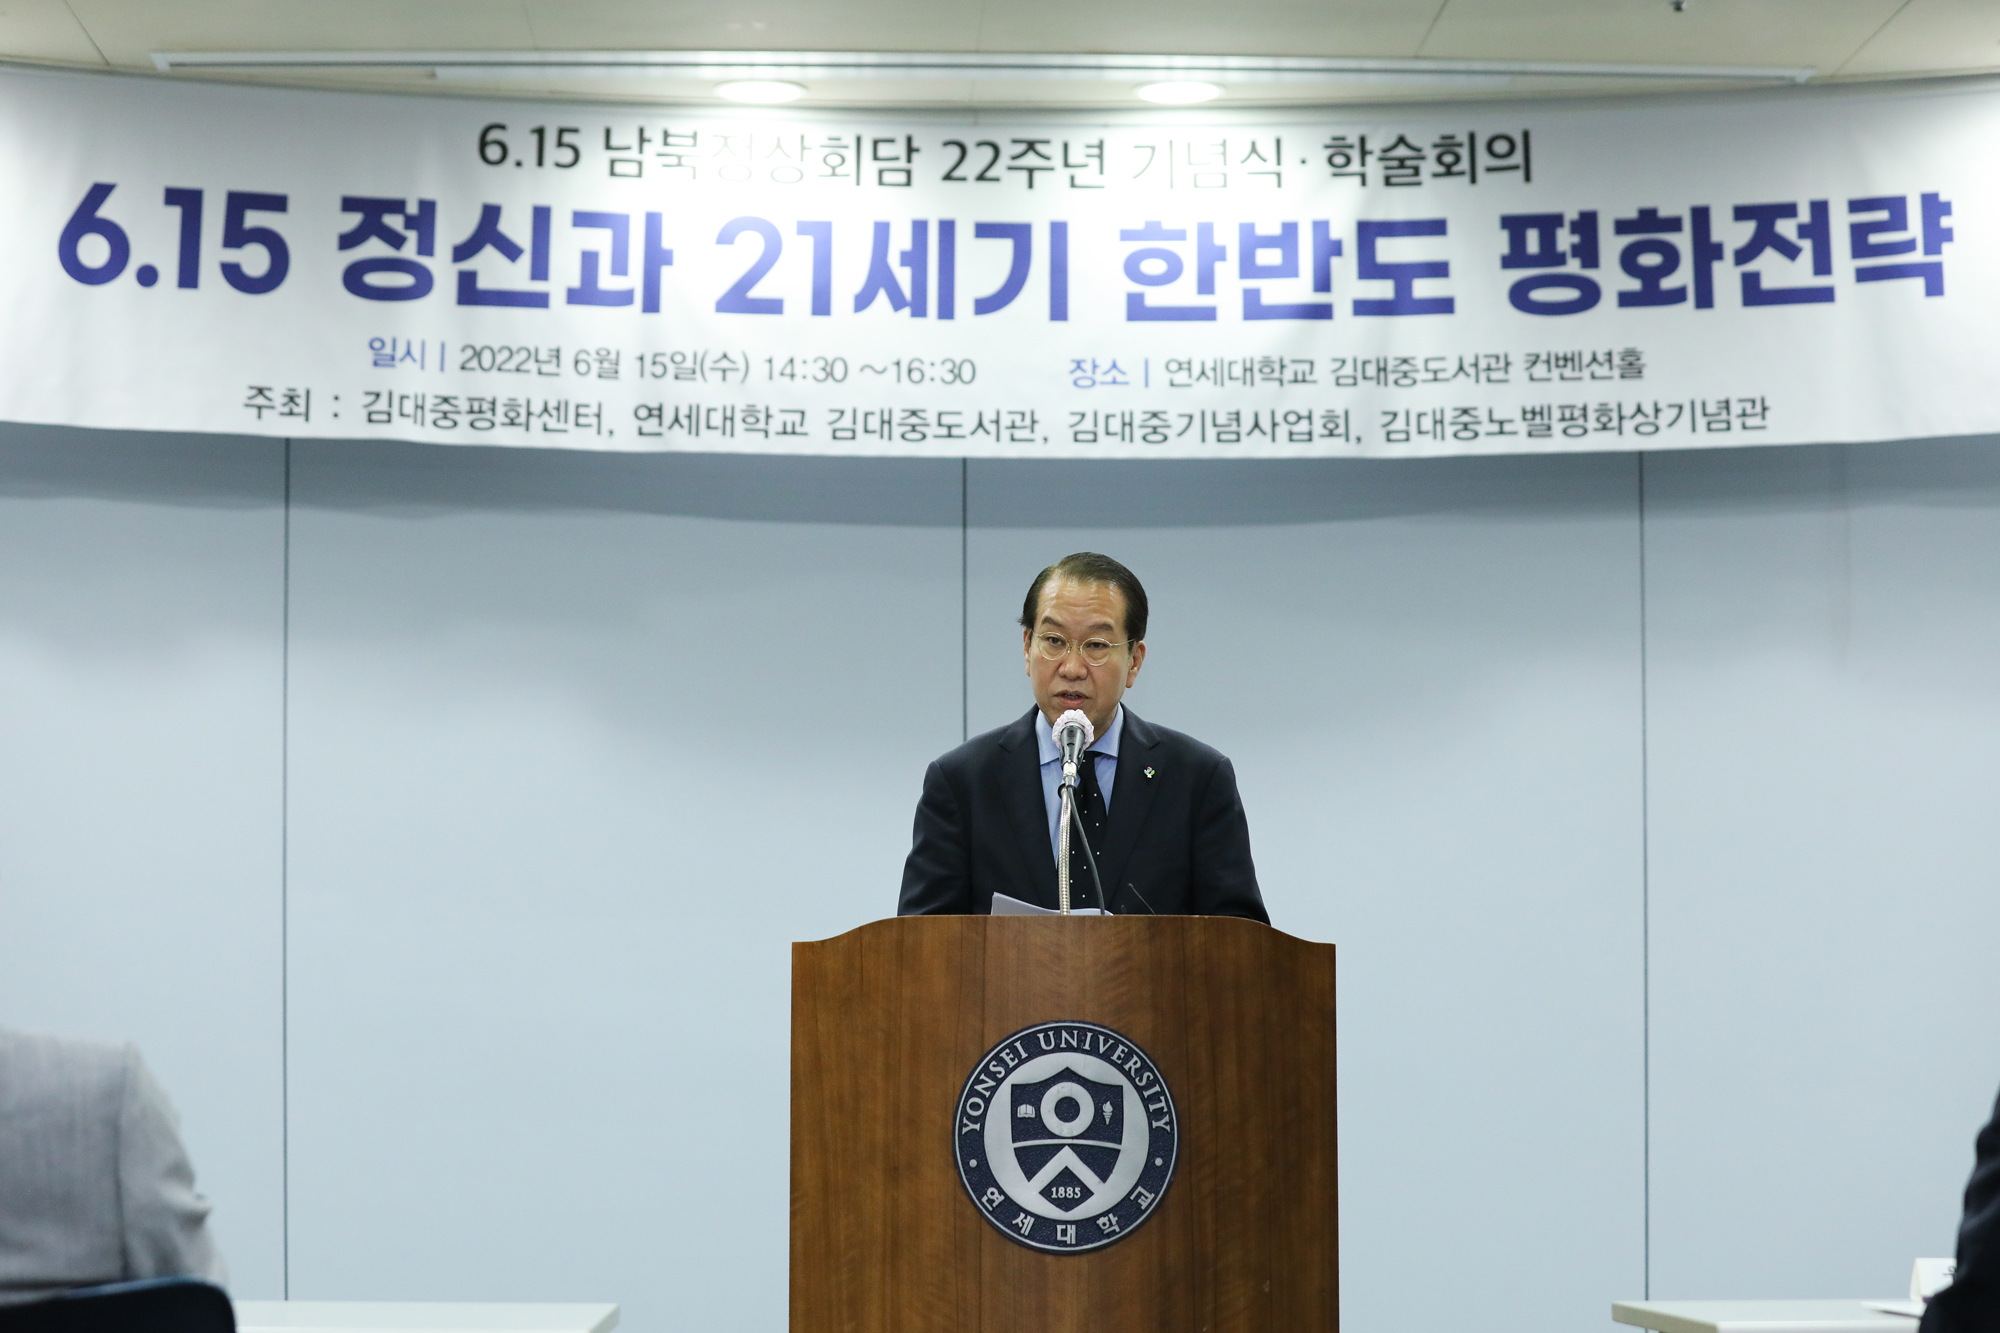 Unification Minister Kwon Youngse Delivers Congratulatory Remarks at the 22nd Anniversary of the June 15 Inter-Korean Summit